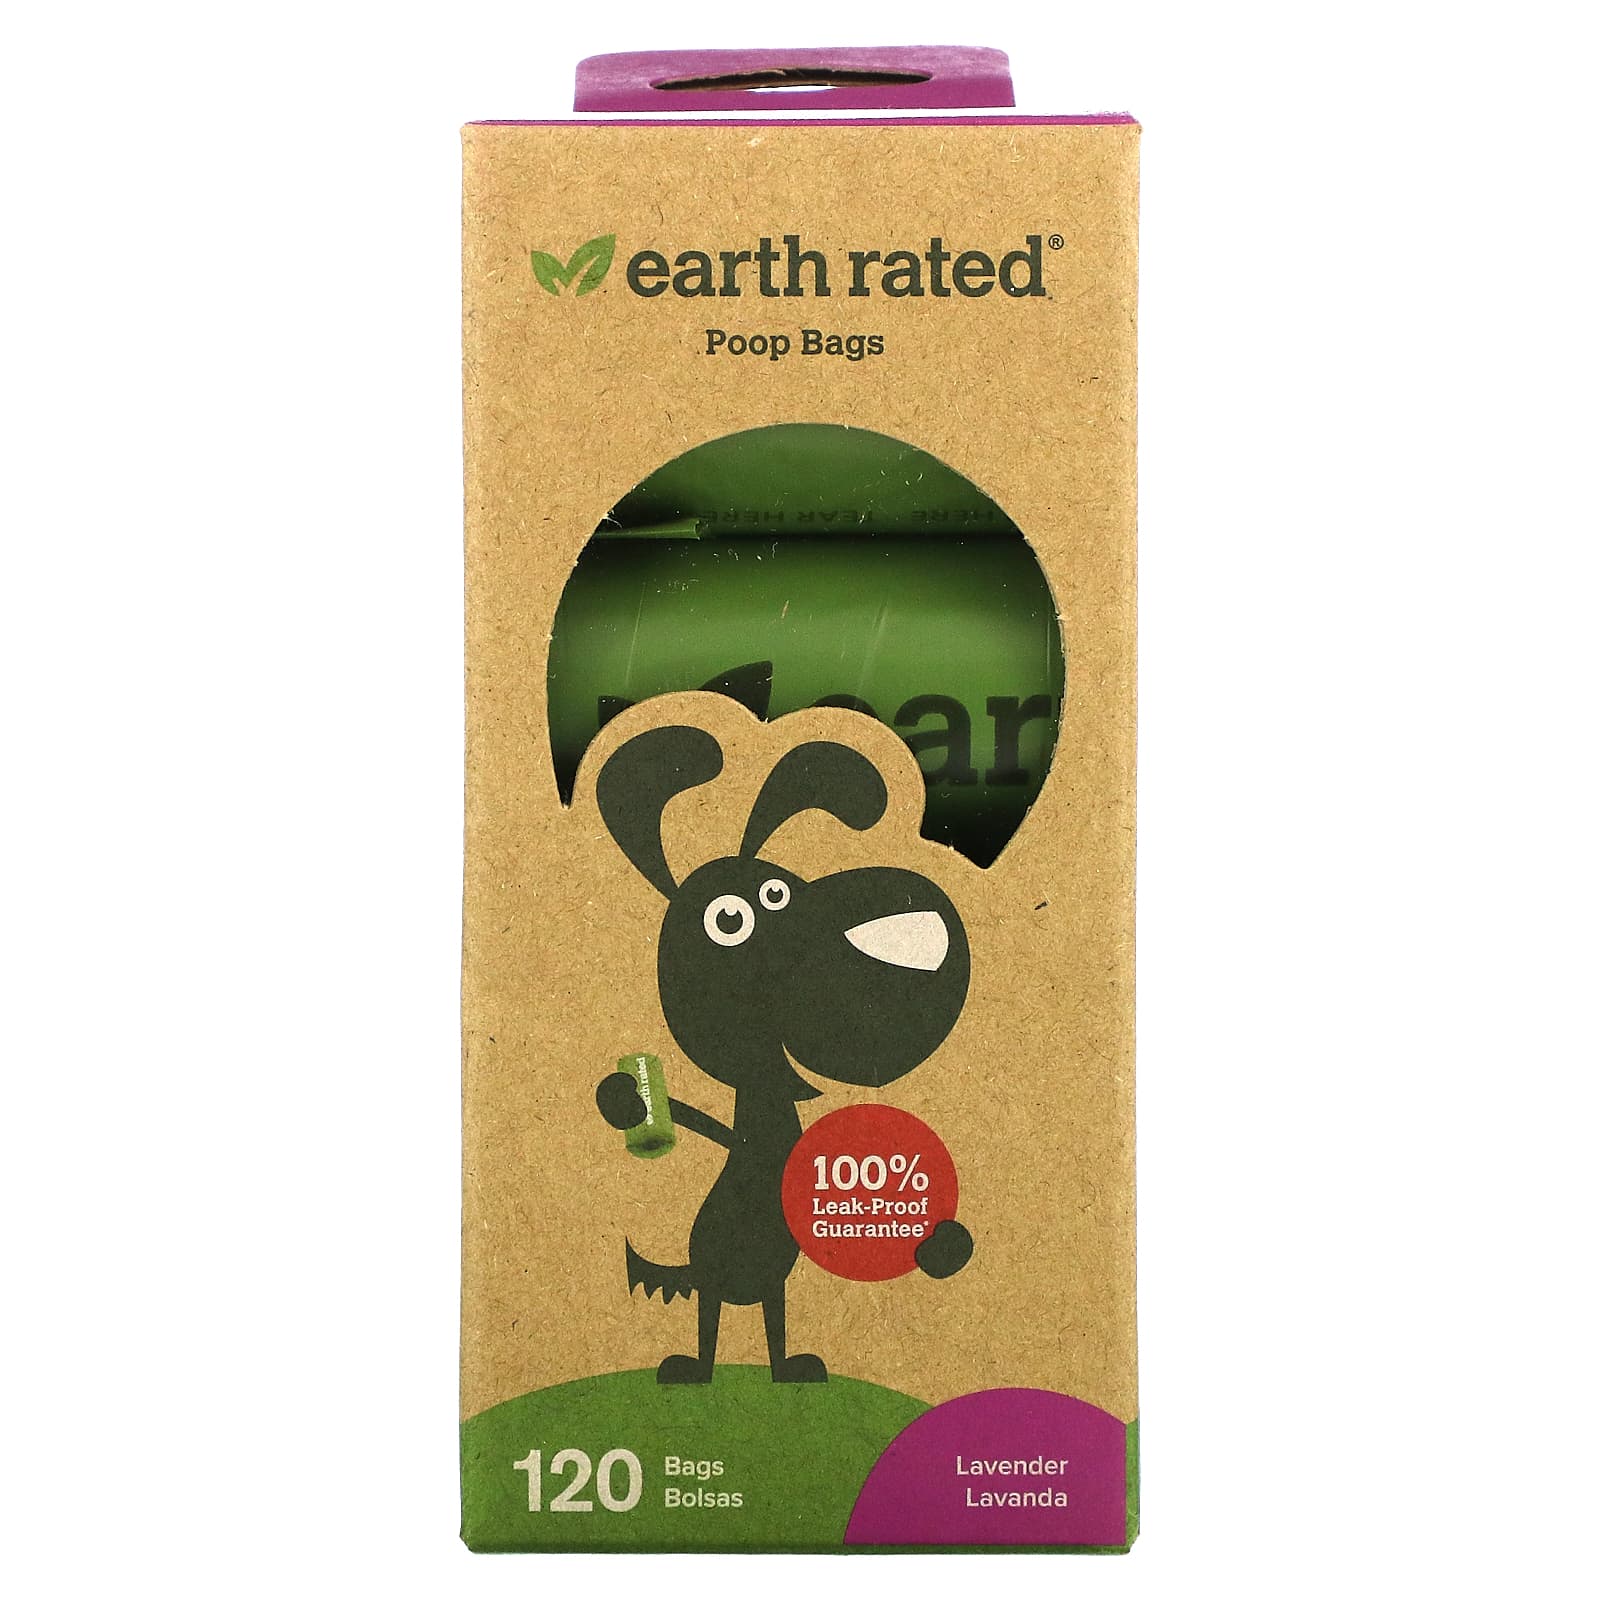 Poop Bags on a Single Roll for Pantries Earth Rated Dog Waste Bags not on Small Rolls 